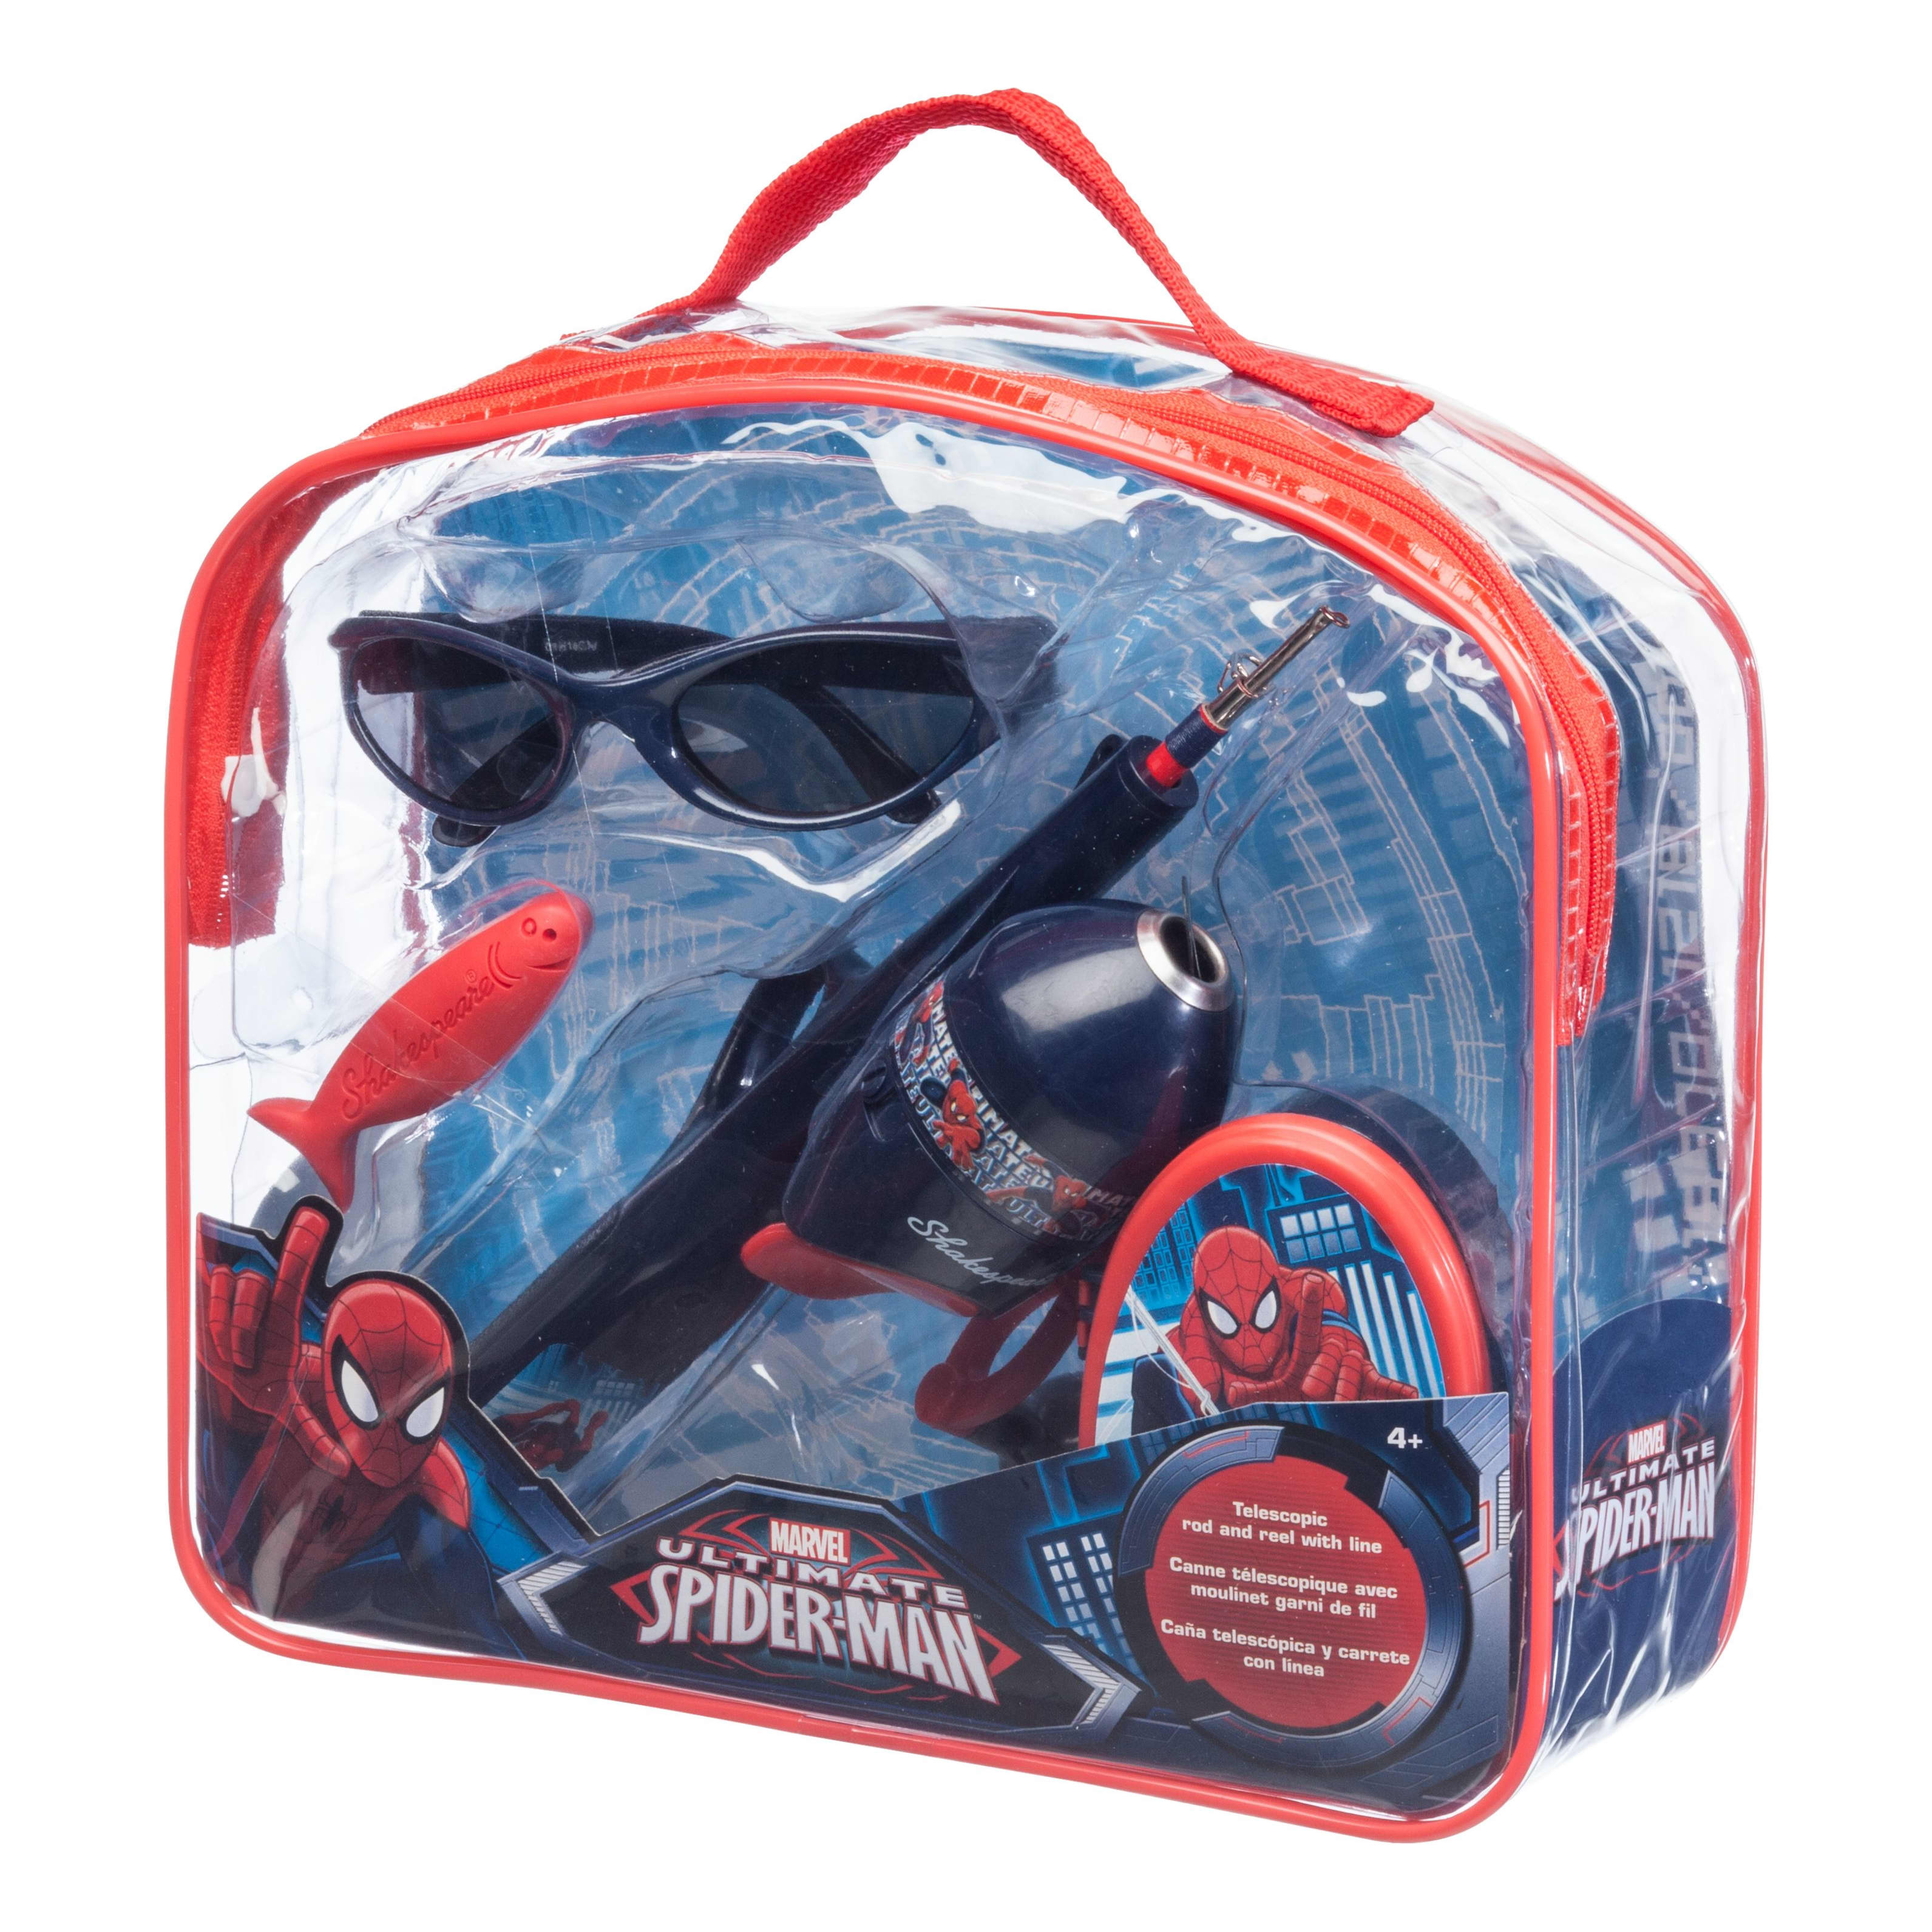 Shakespeare® Spiderman® Rod and Reel Backpack Fishing Kit | Cabela's Canada